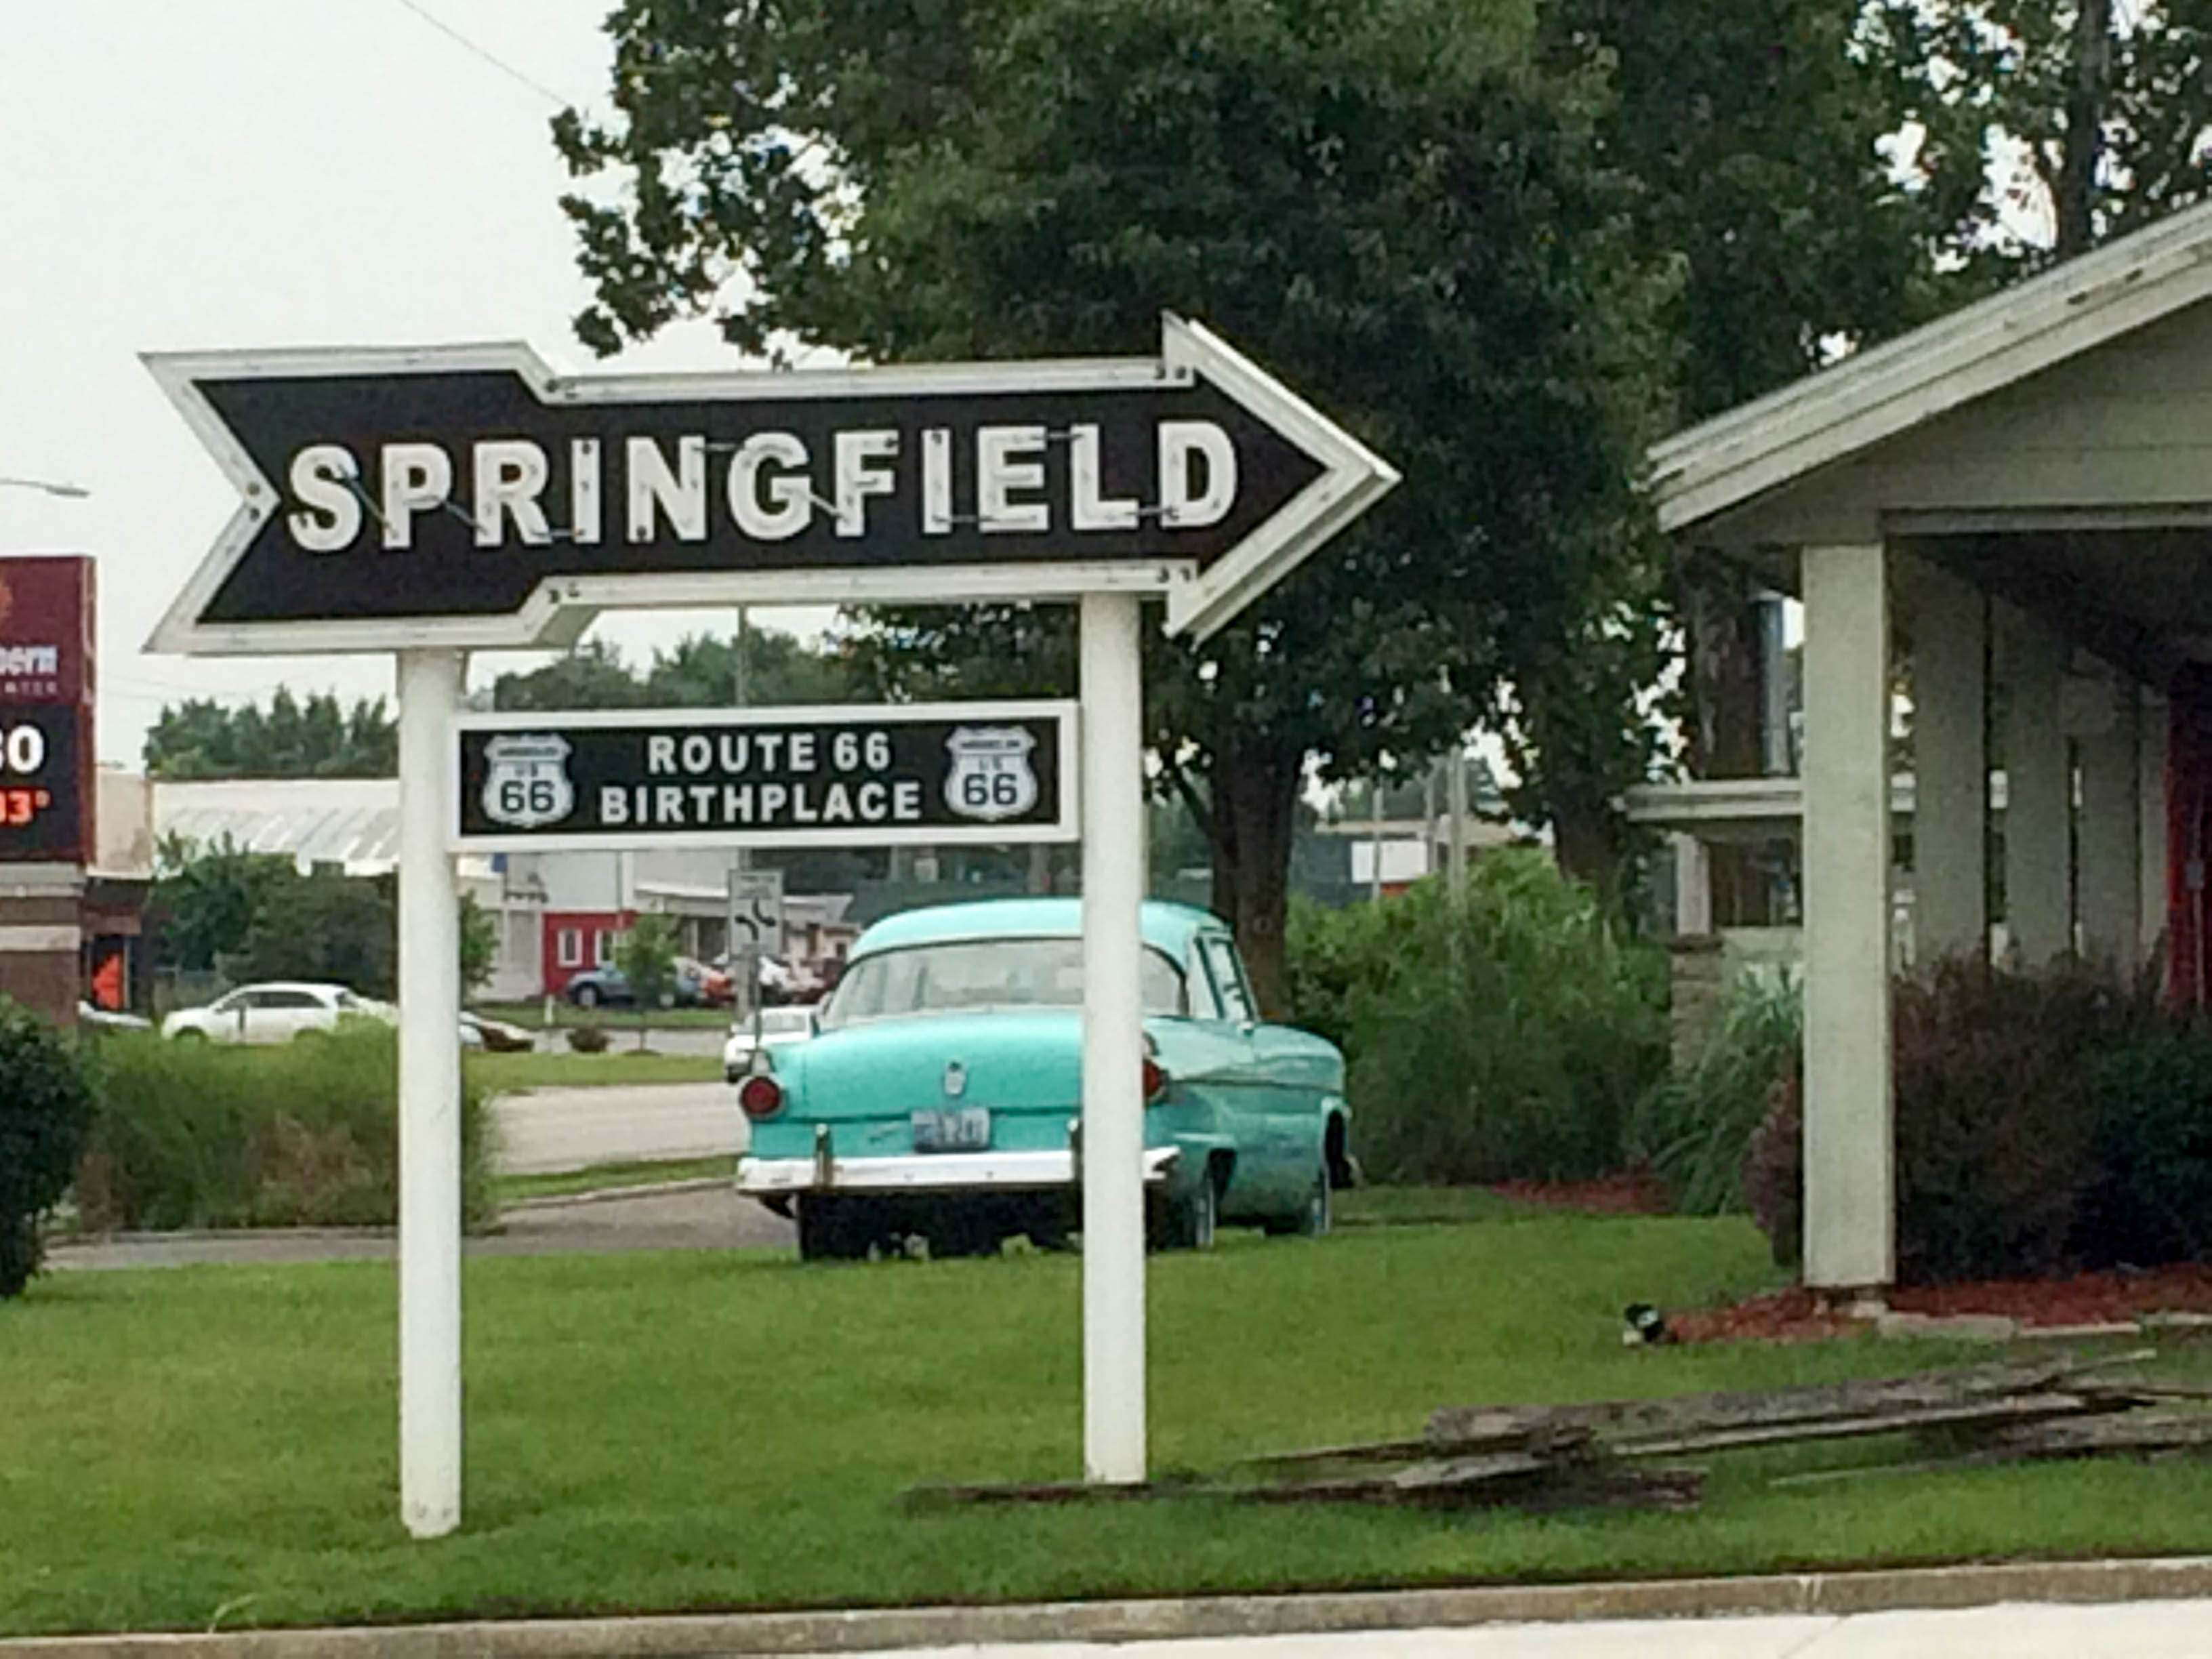 Back to Springfield.